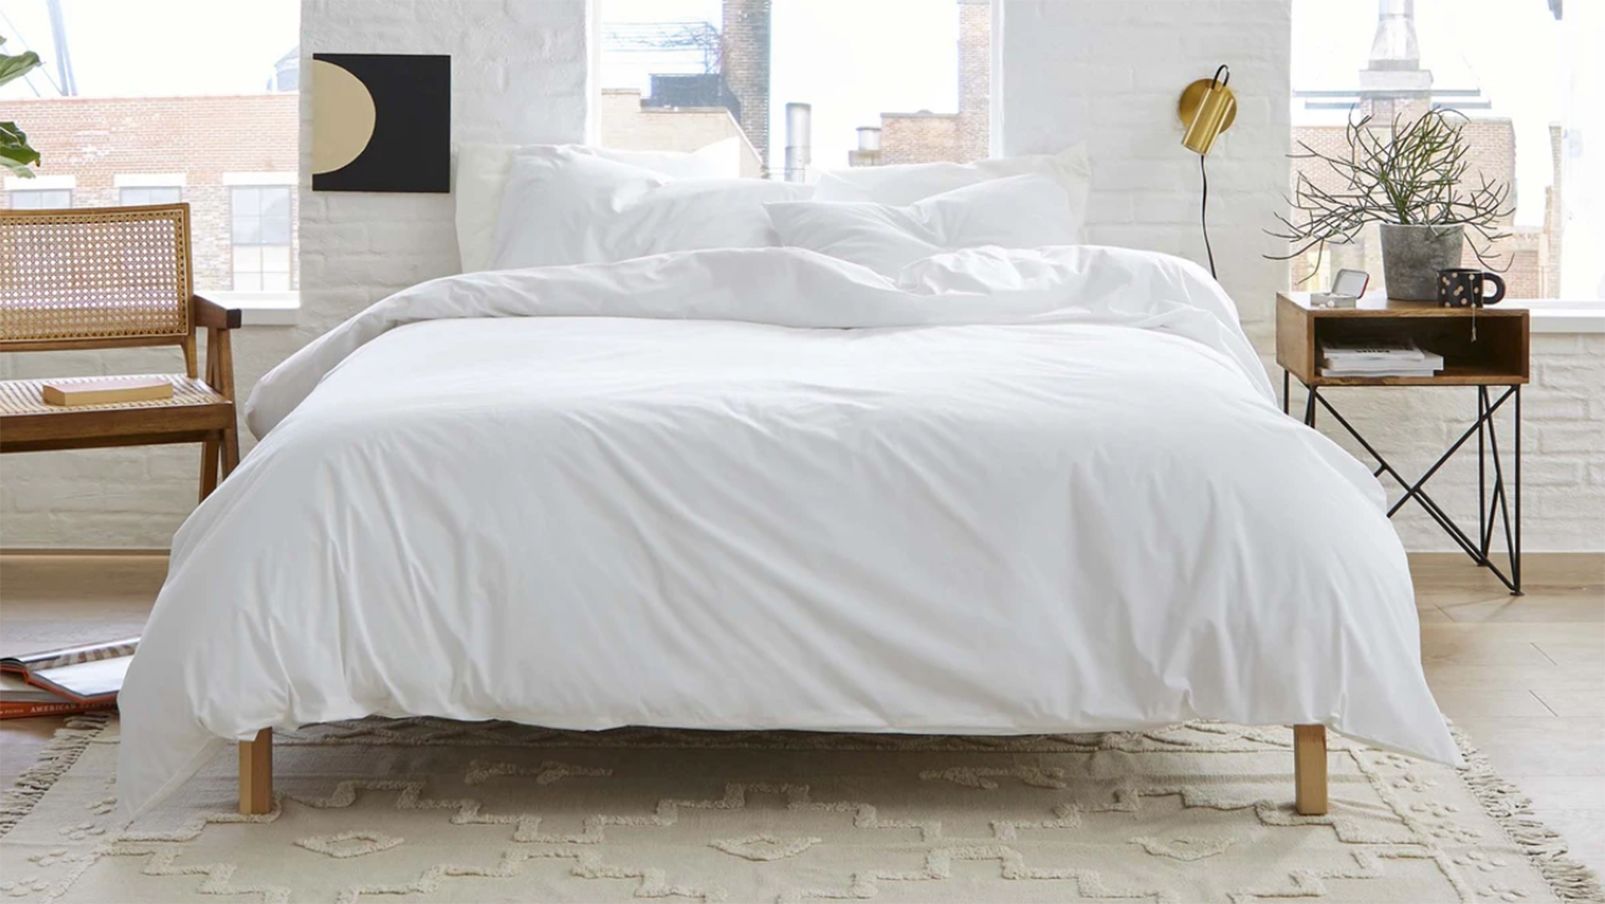 Best Duvet Covers Of 2021 Cnn Underscored, Is There A Duvet Larger Than King